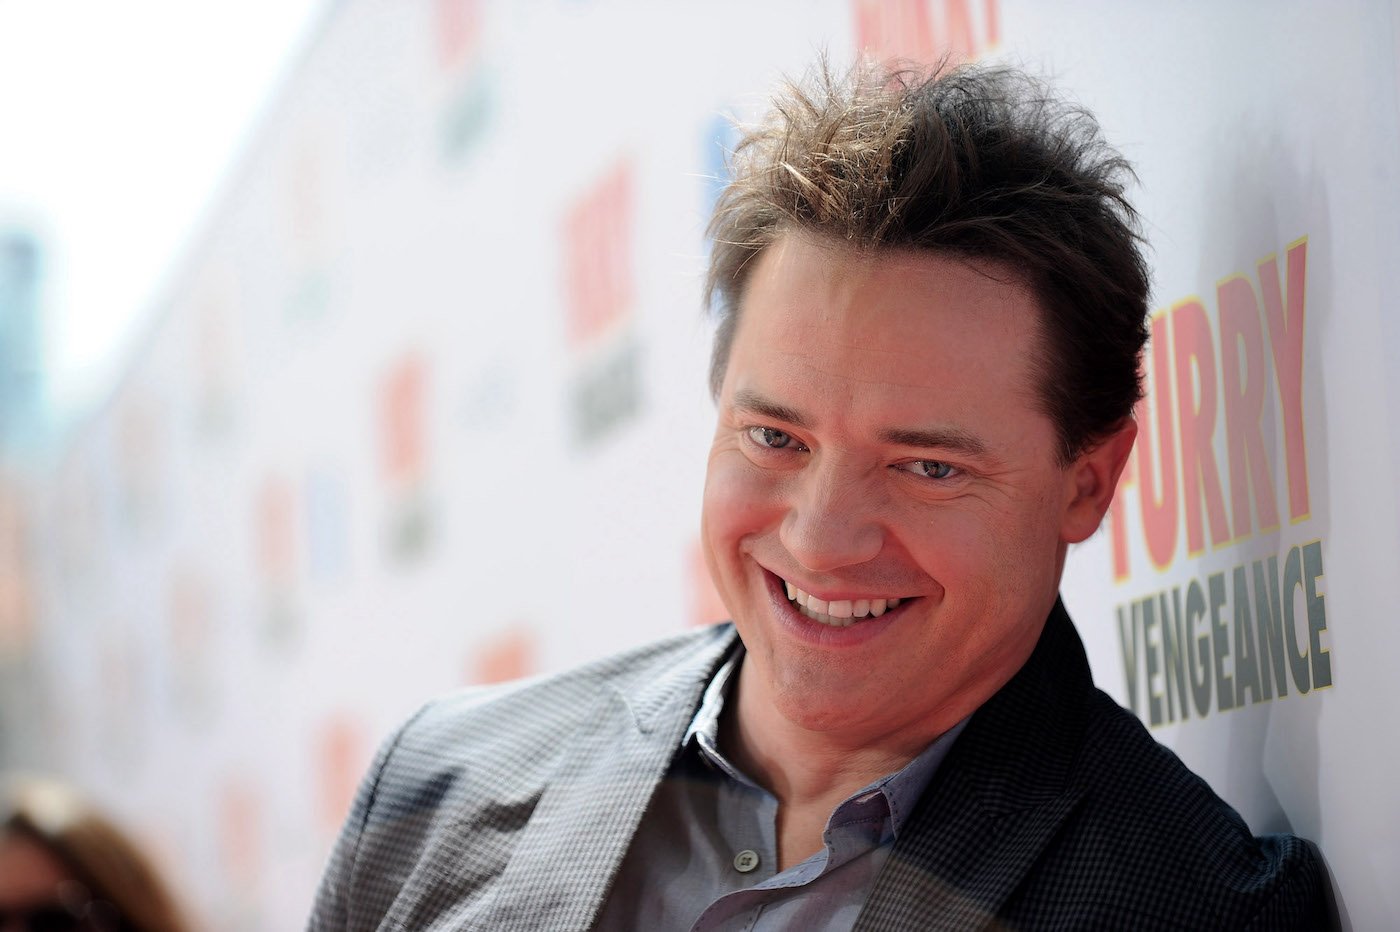 Actor Brendan Fraser arrives at the premiere of 'Furry Vengeance' at the Bruin Theatre on April 18, 2010, in Westwood, California